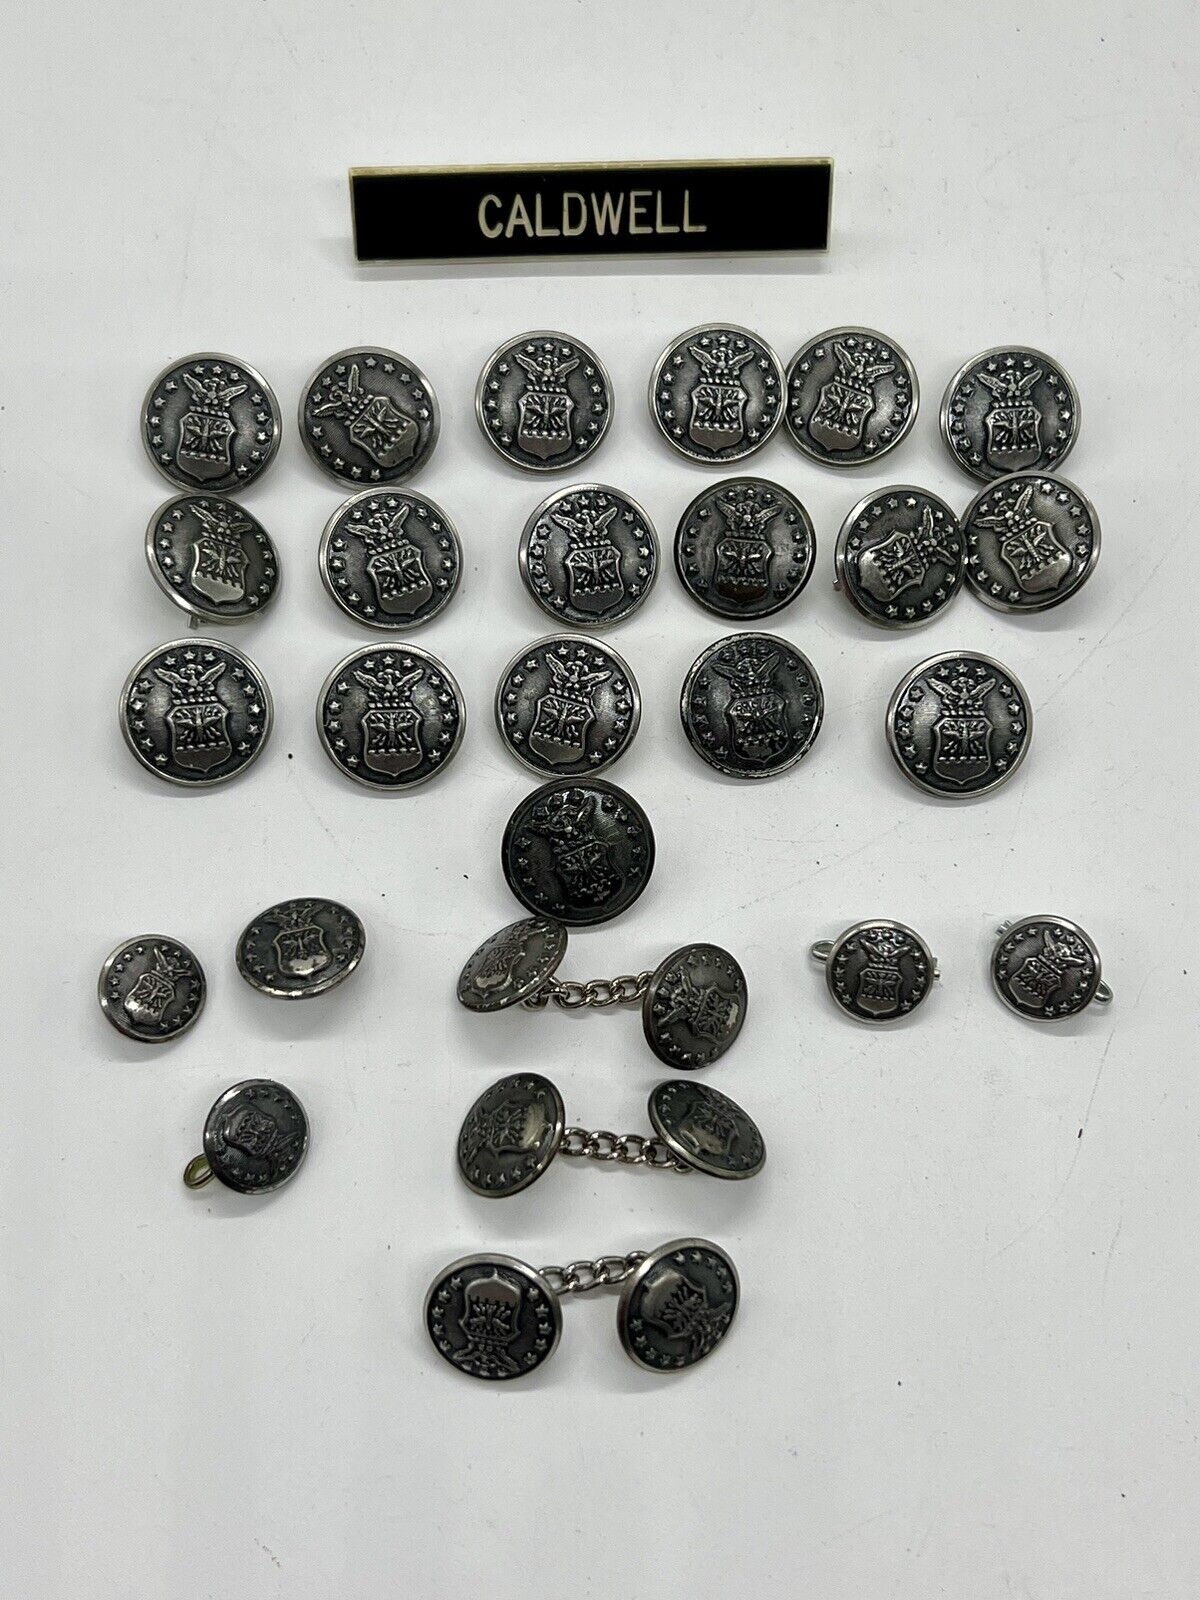 29 Waterbury & Meyer US AIR FORCE WW2 Uniform Buttons & Name Tag